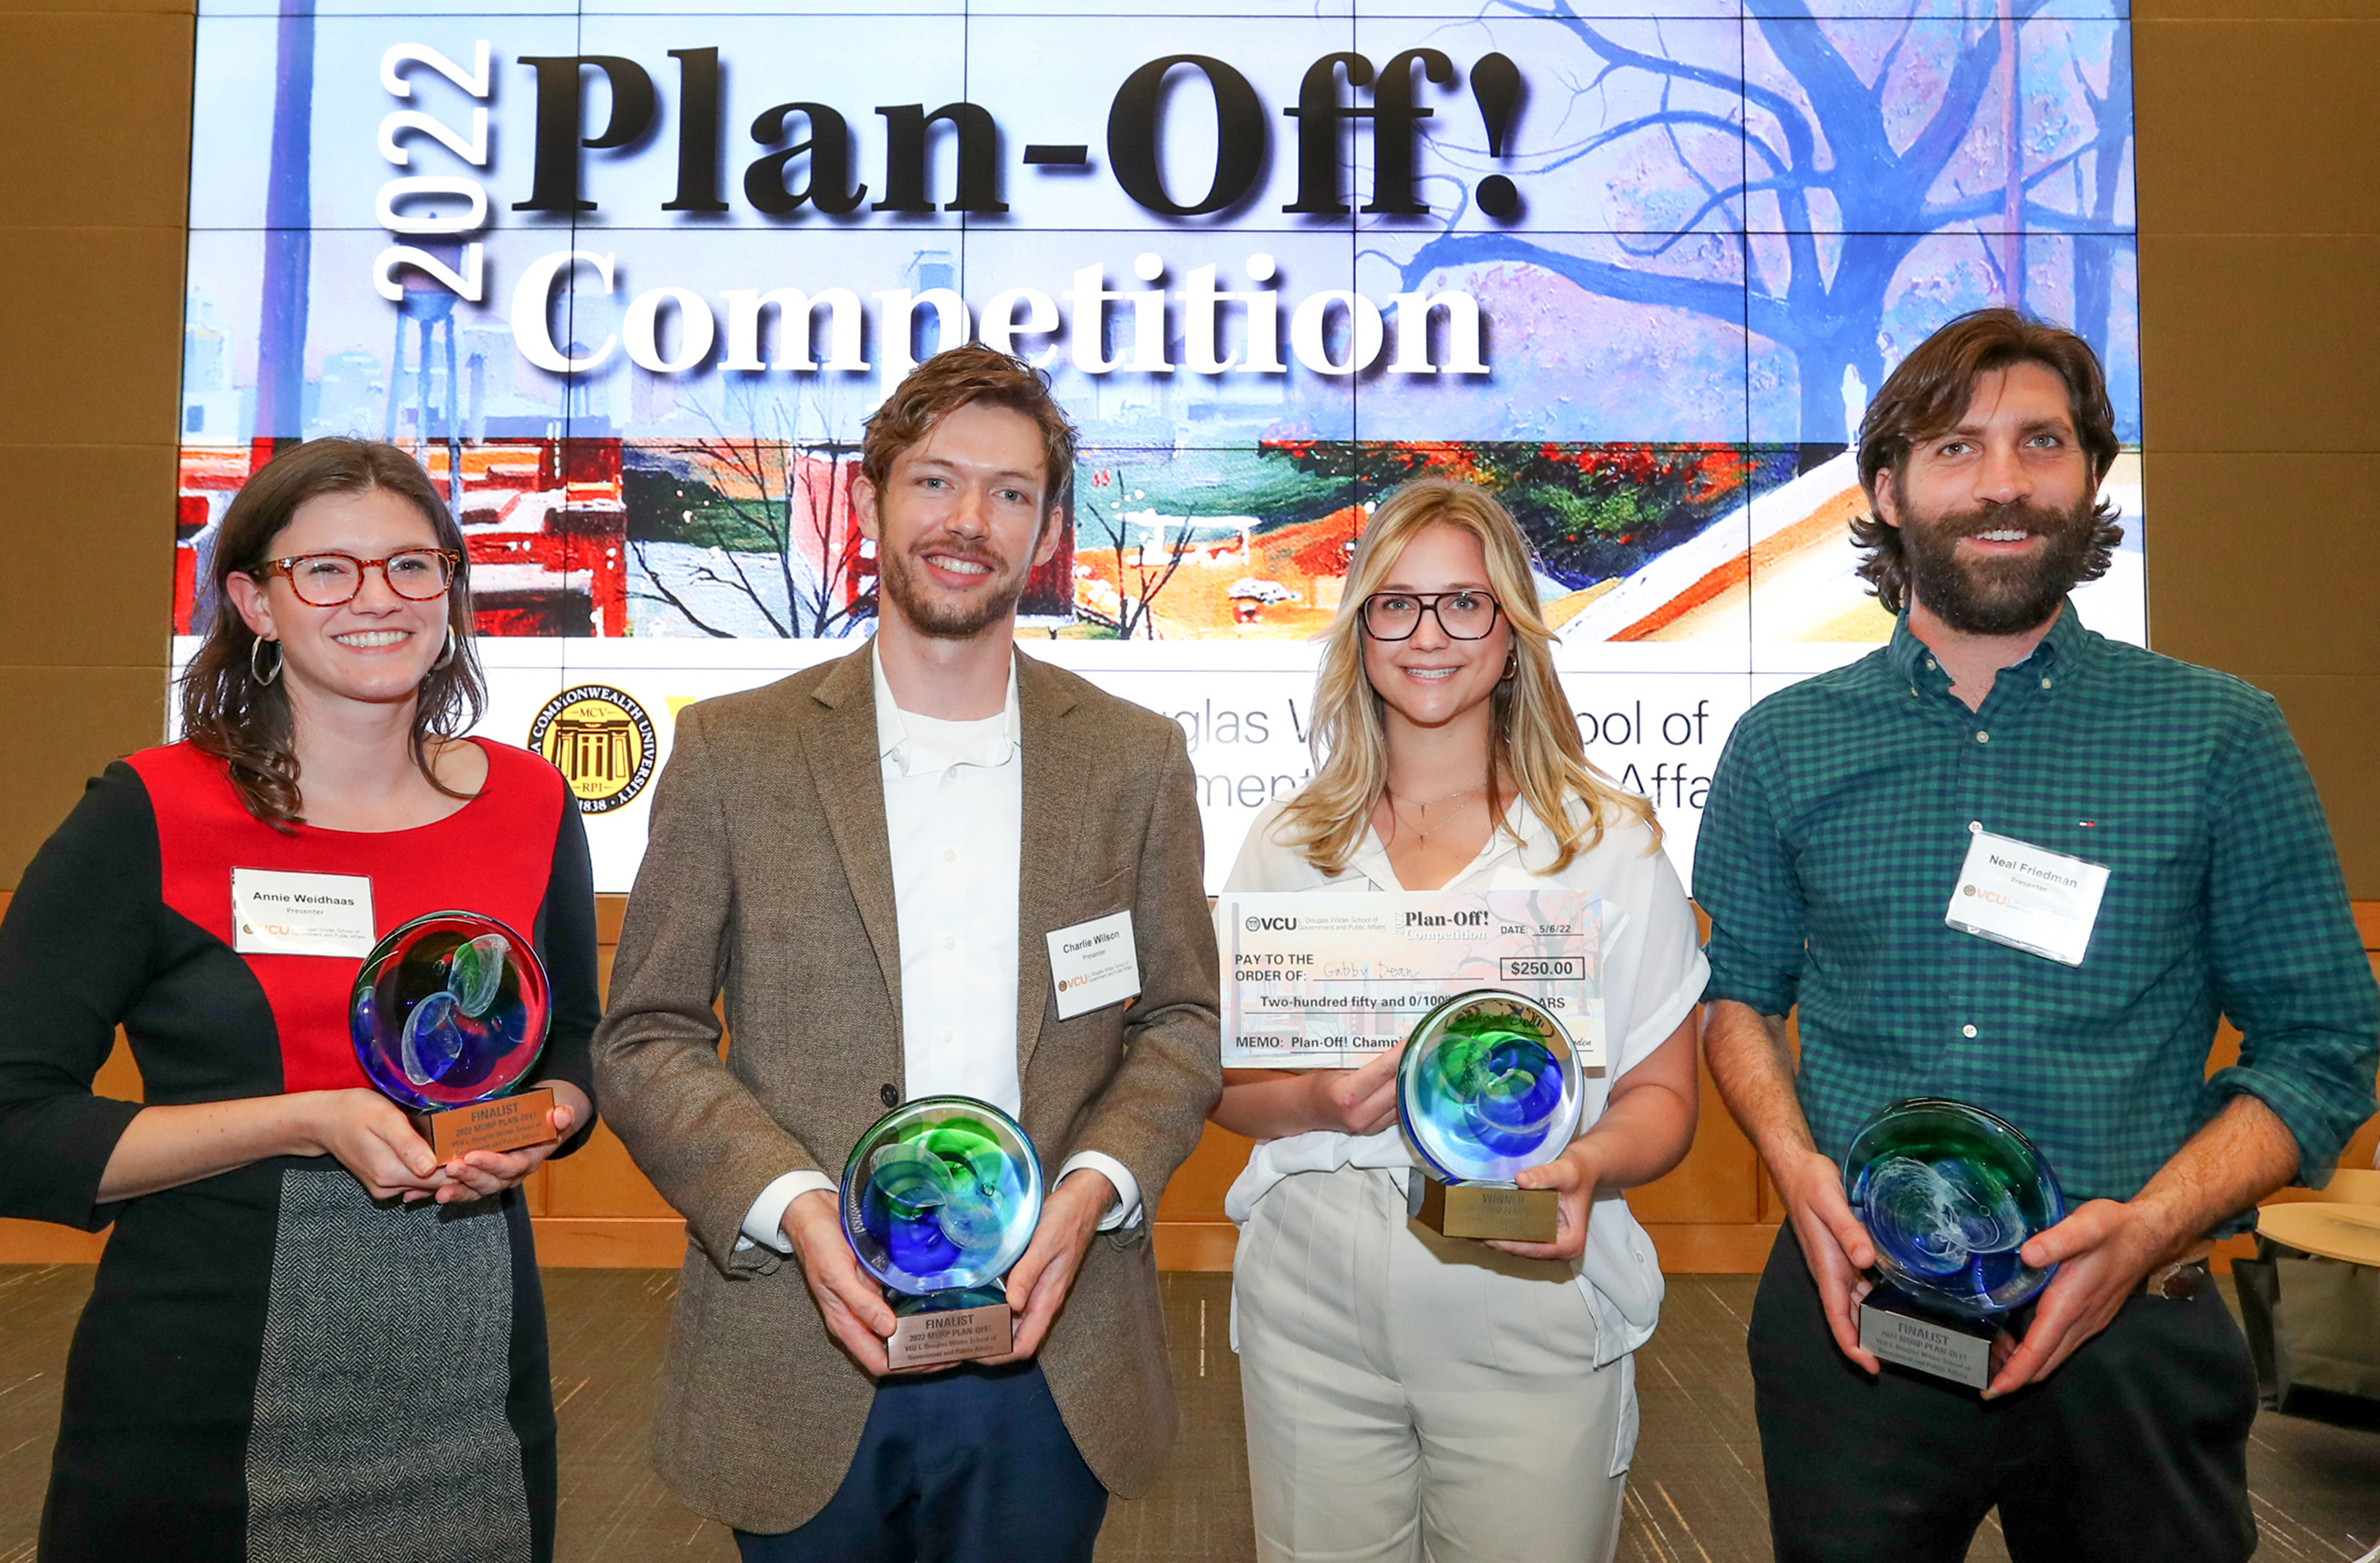 Congratulations to our Plan-Off finalists (left to right): Annie Weidhaas (Overall Best Plan Award), Charlie Wilson, Gabrielle Dean (Grand Prize) and Neal Friedman.